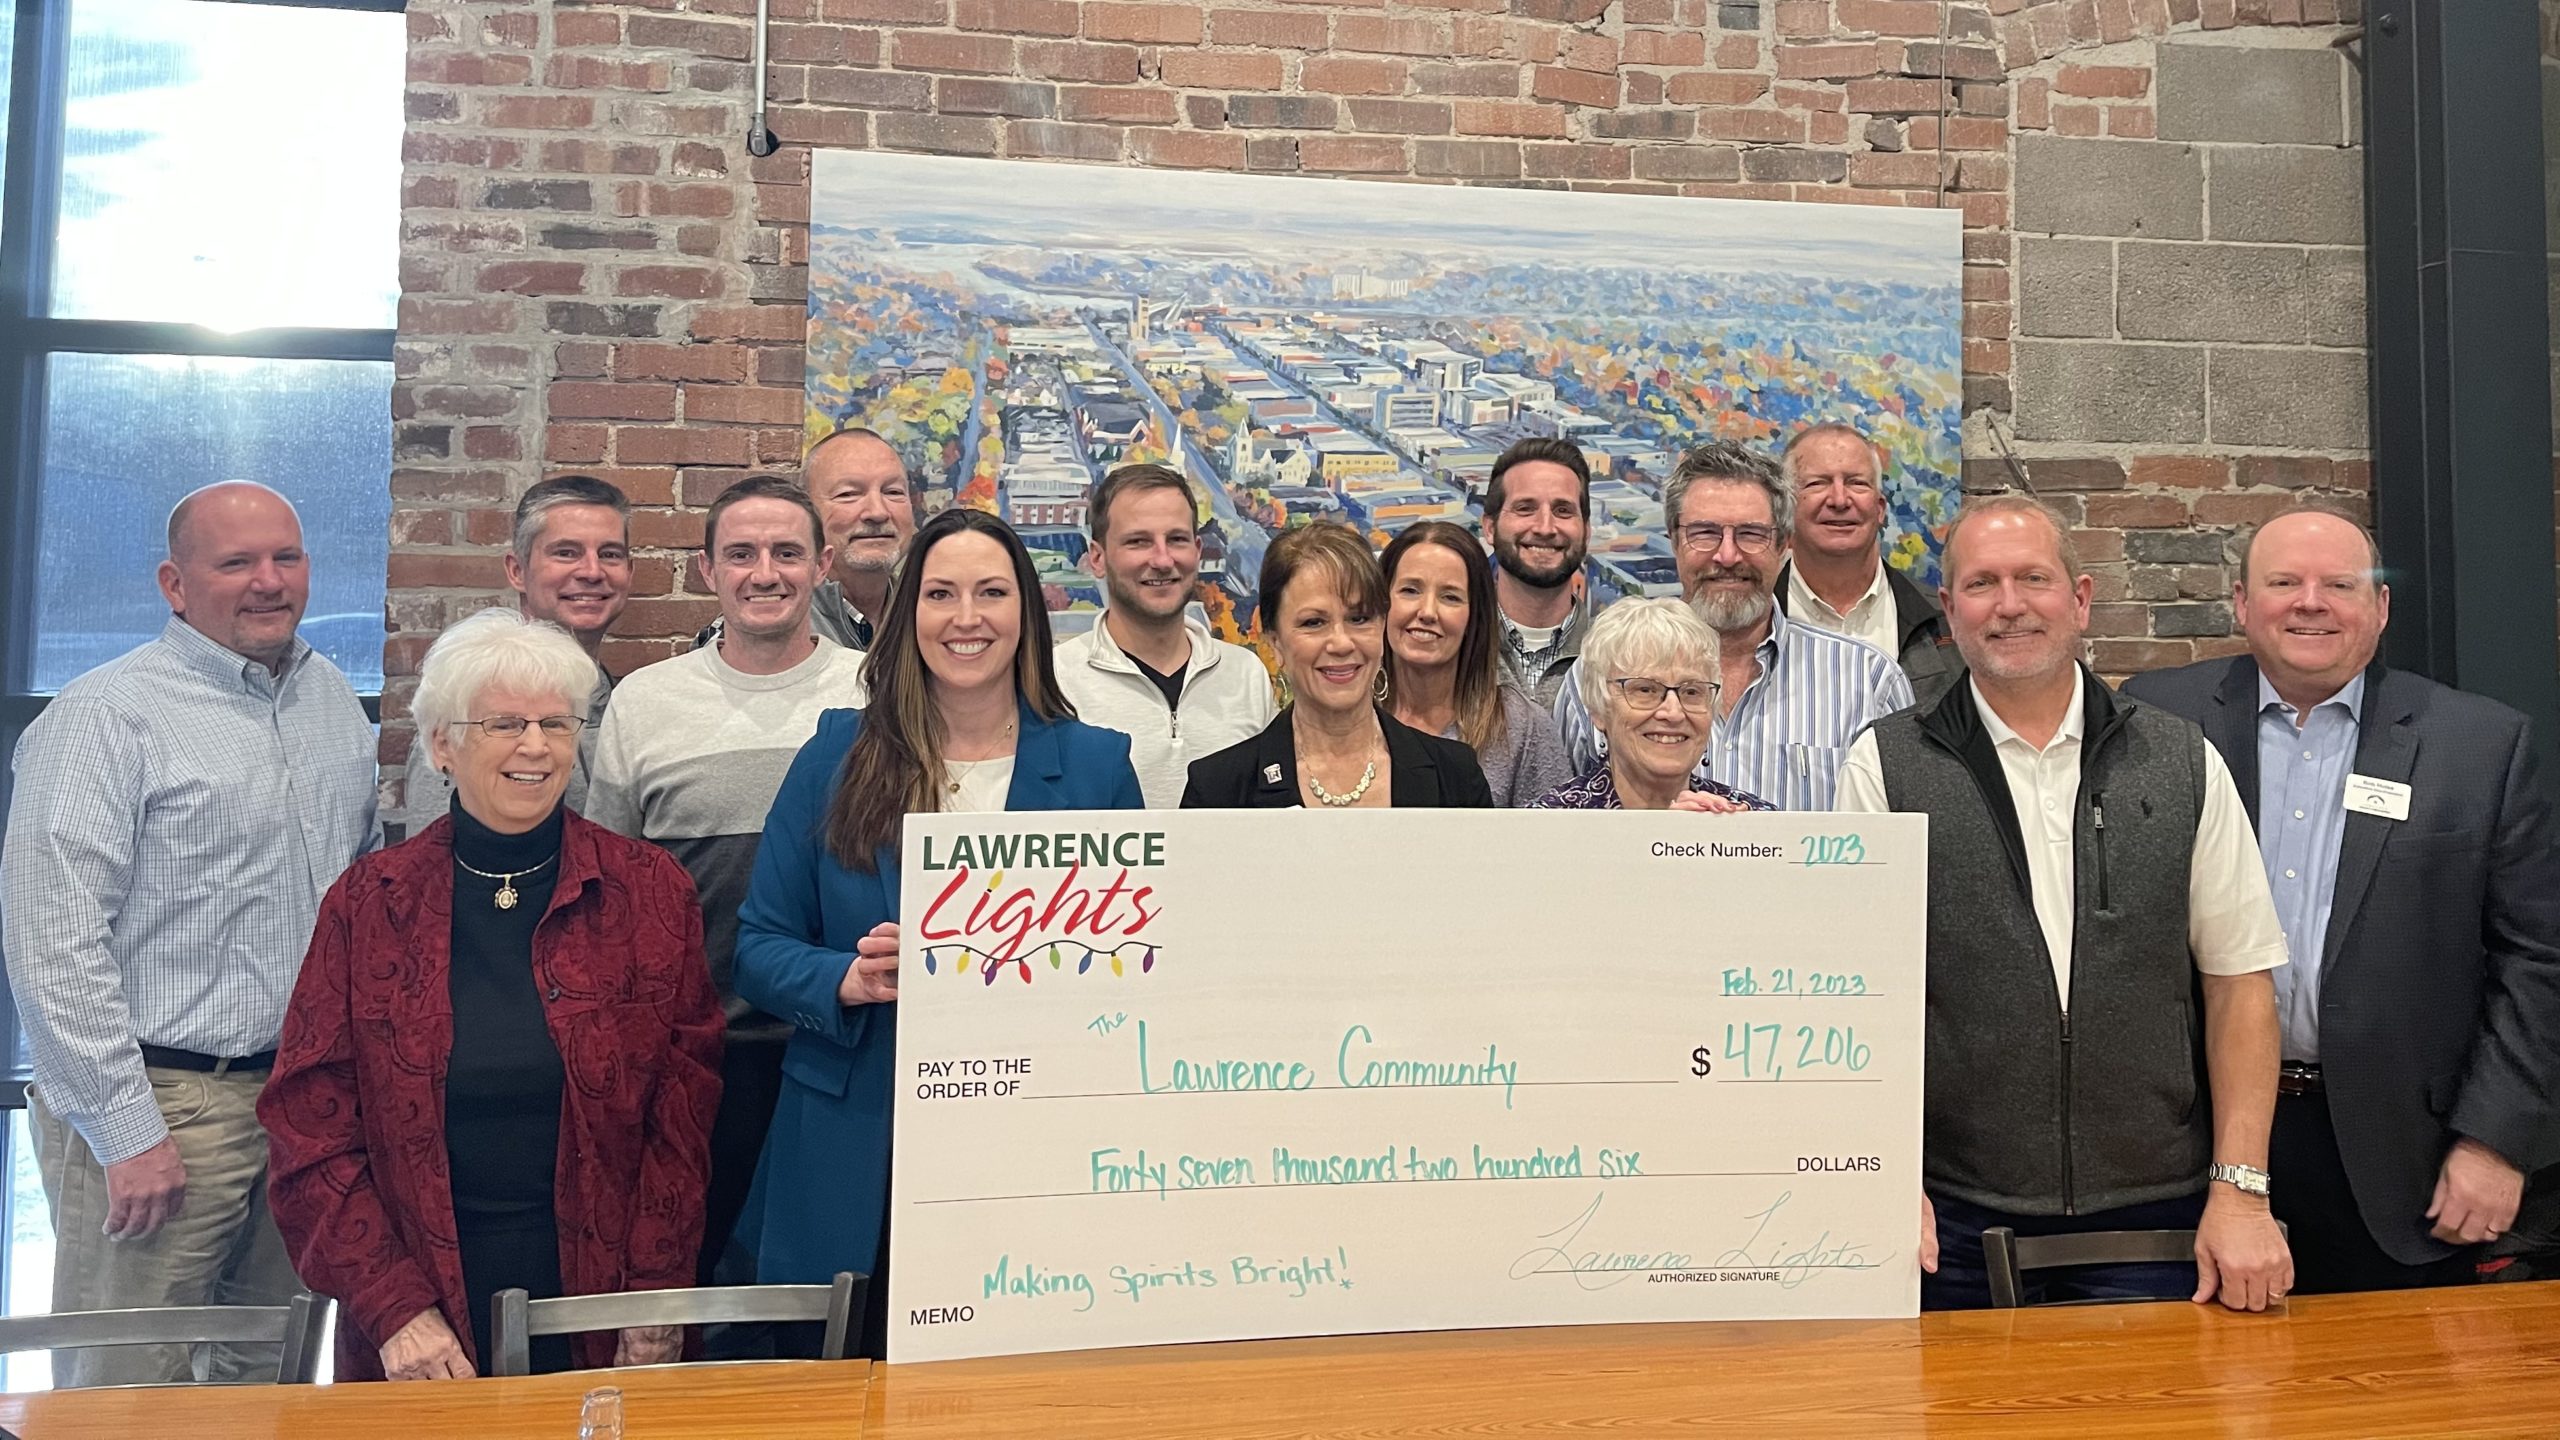 Lawrence Lights Photo with Big Check - 2022 Proceeds